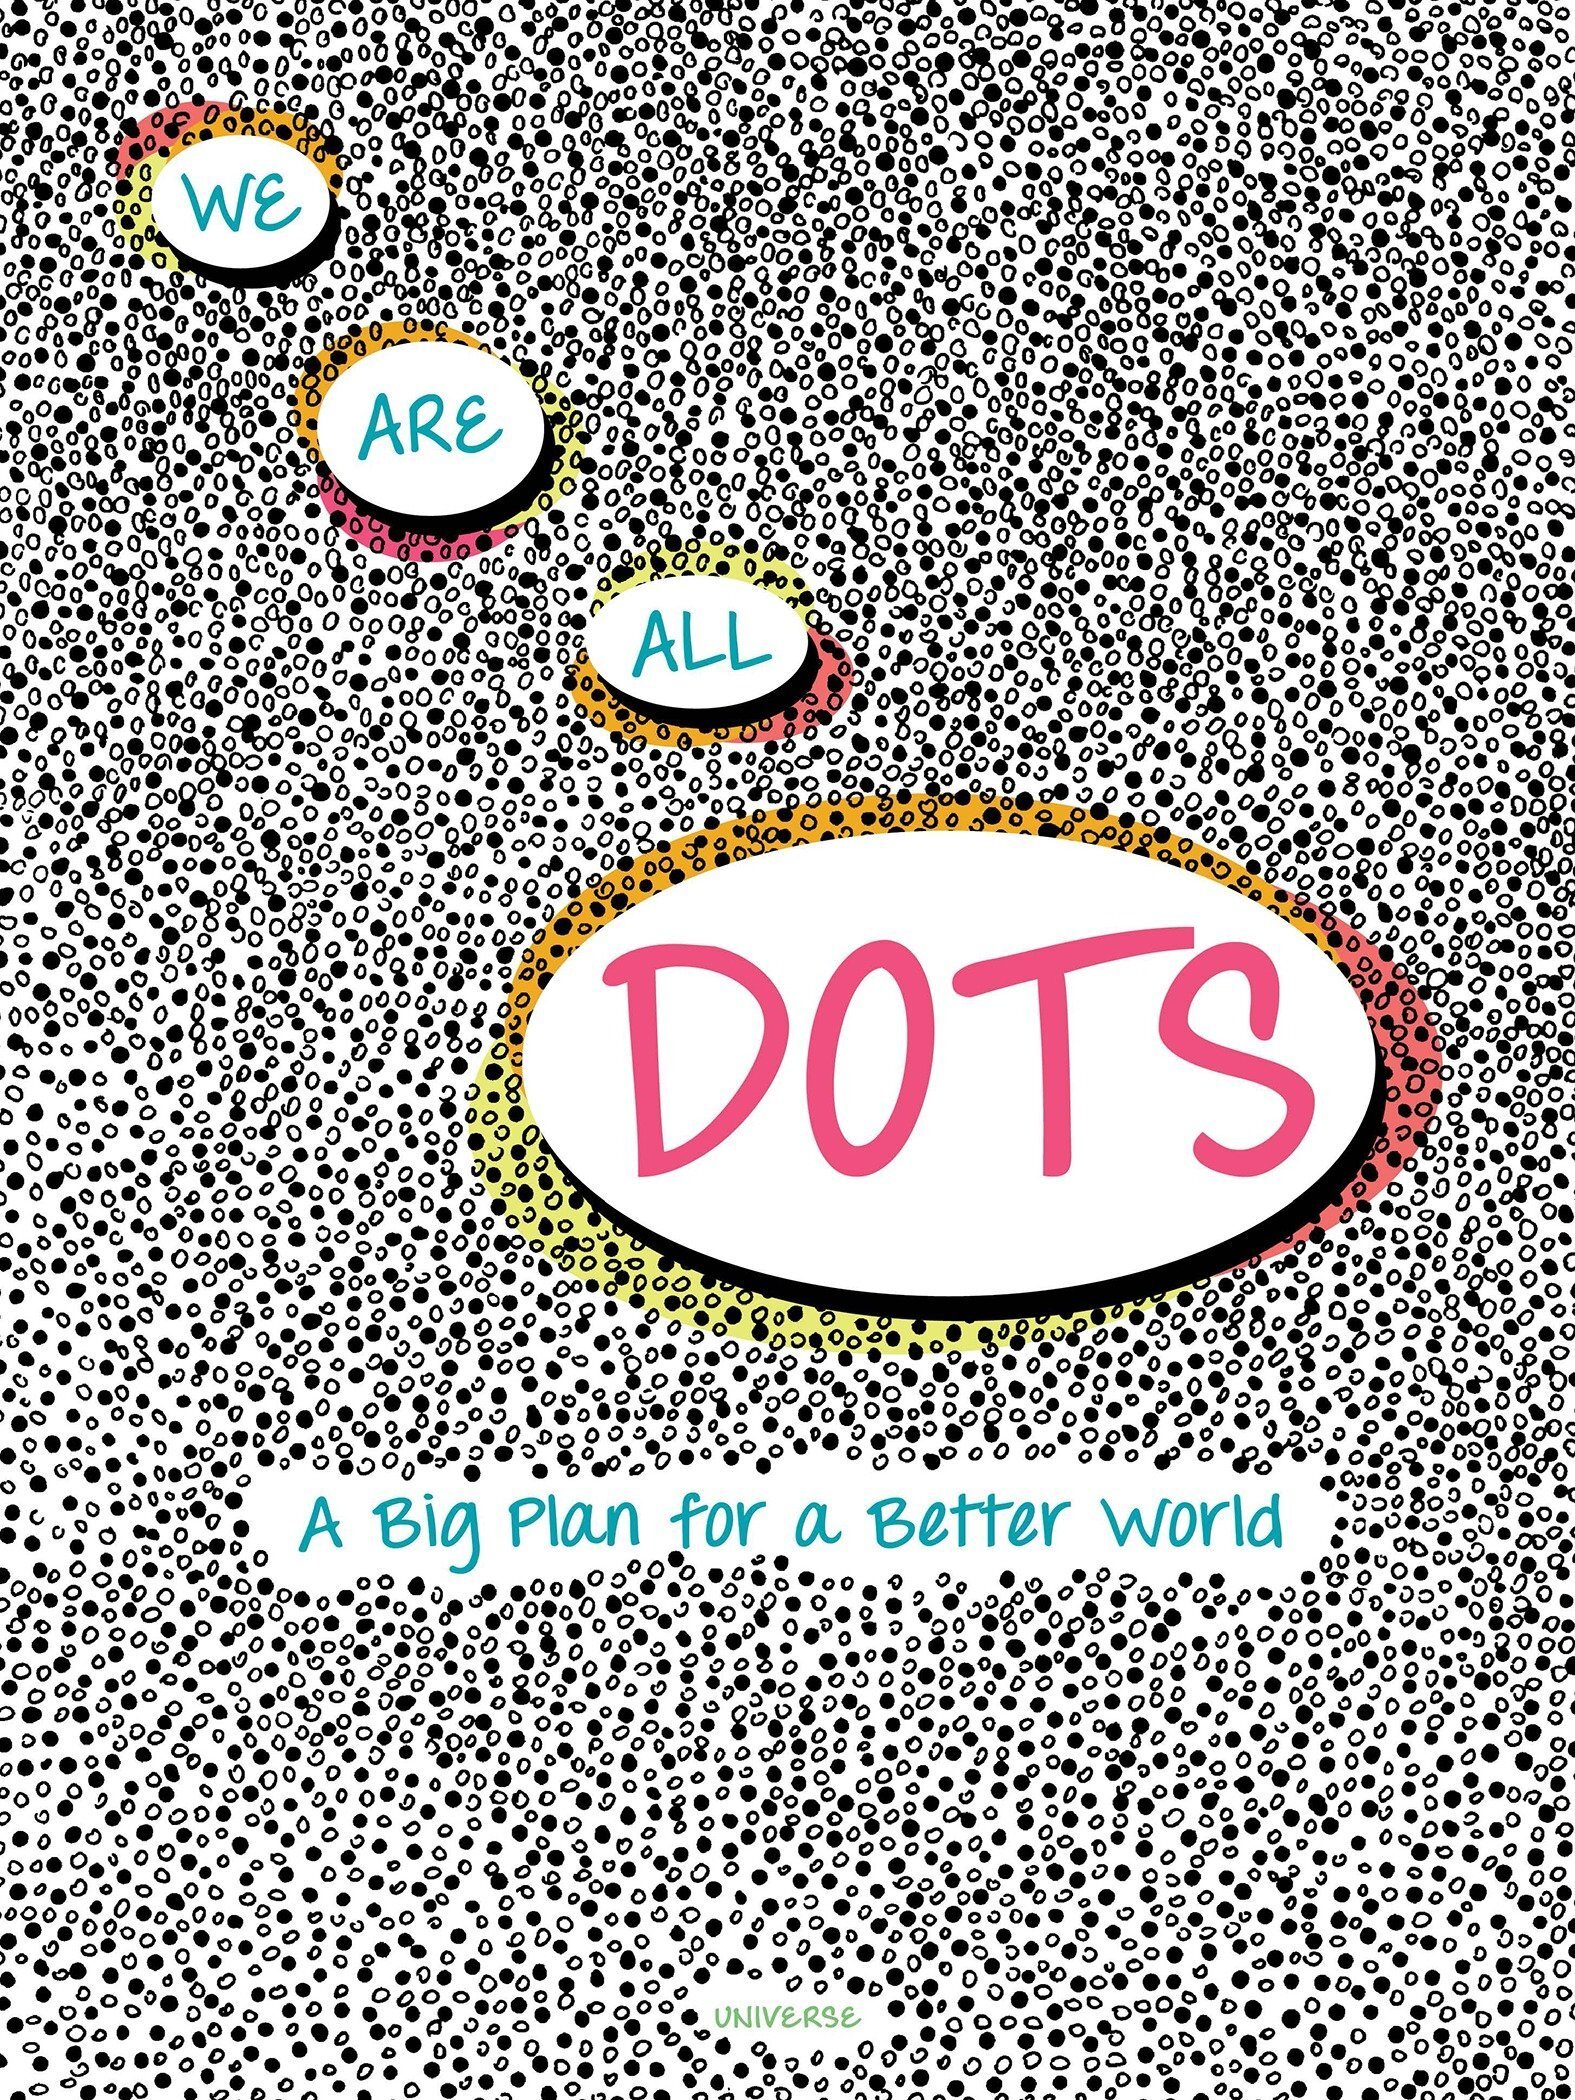 We Are All Dots – Giancarlo Macrì